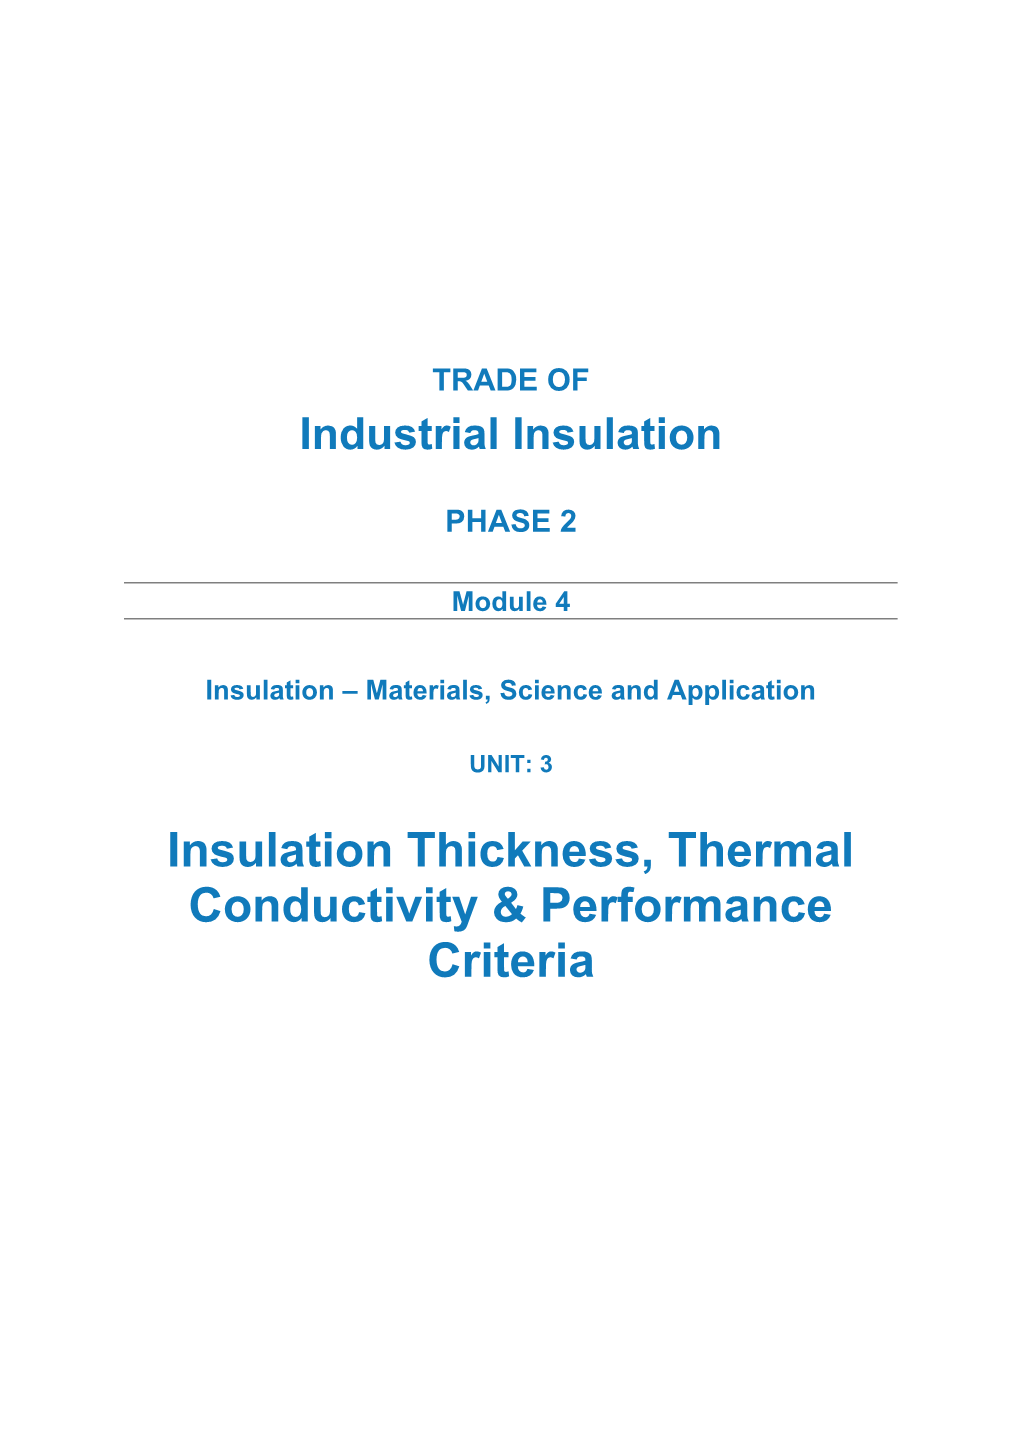 Insulation Materials, Science and Application